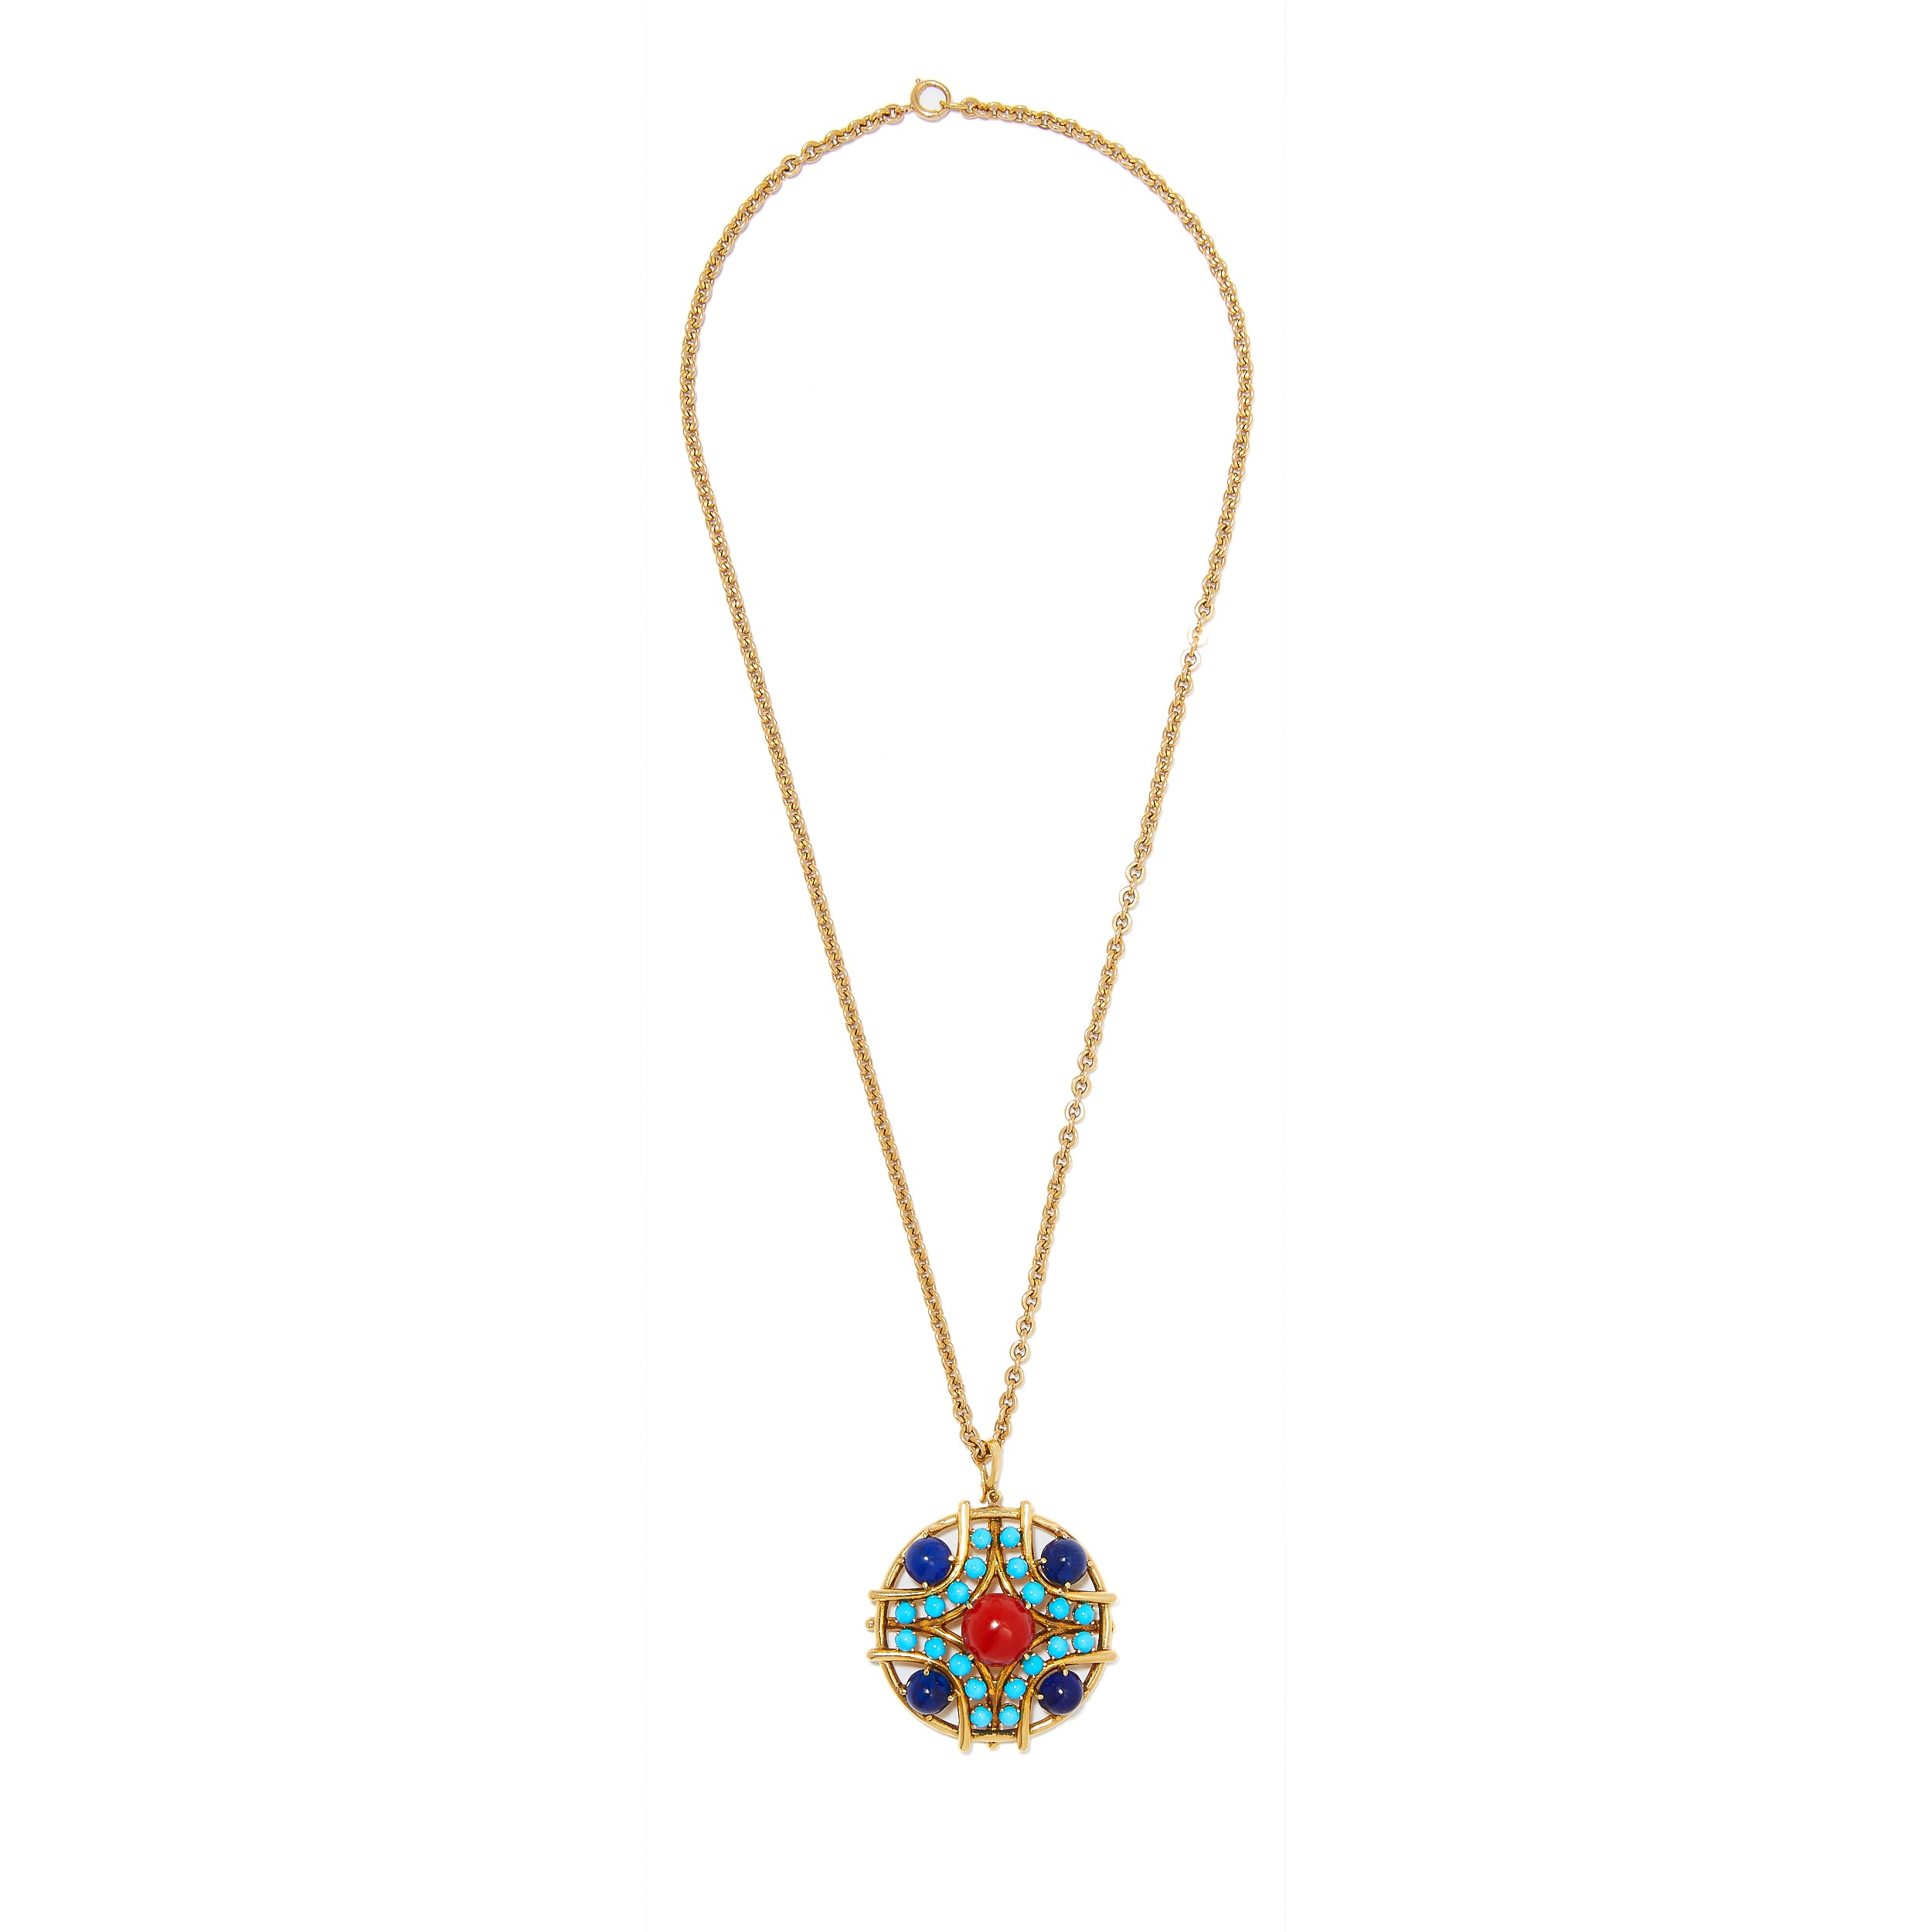 Fifth Avenue vintage gold medallion necklace with multi-coloured gemstones